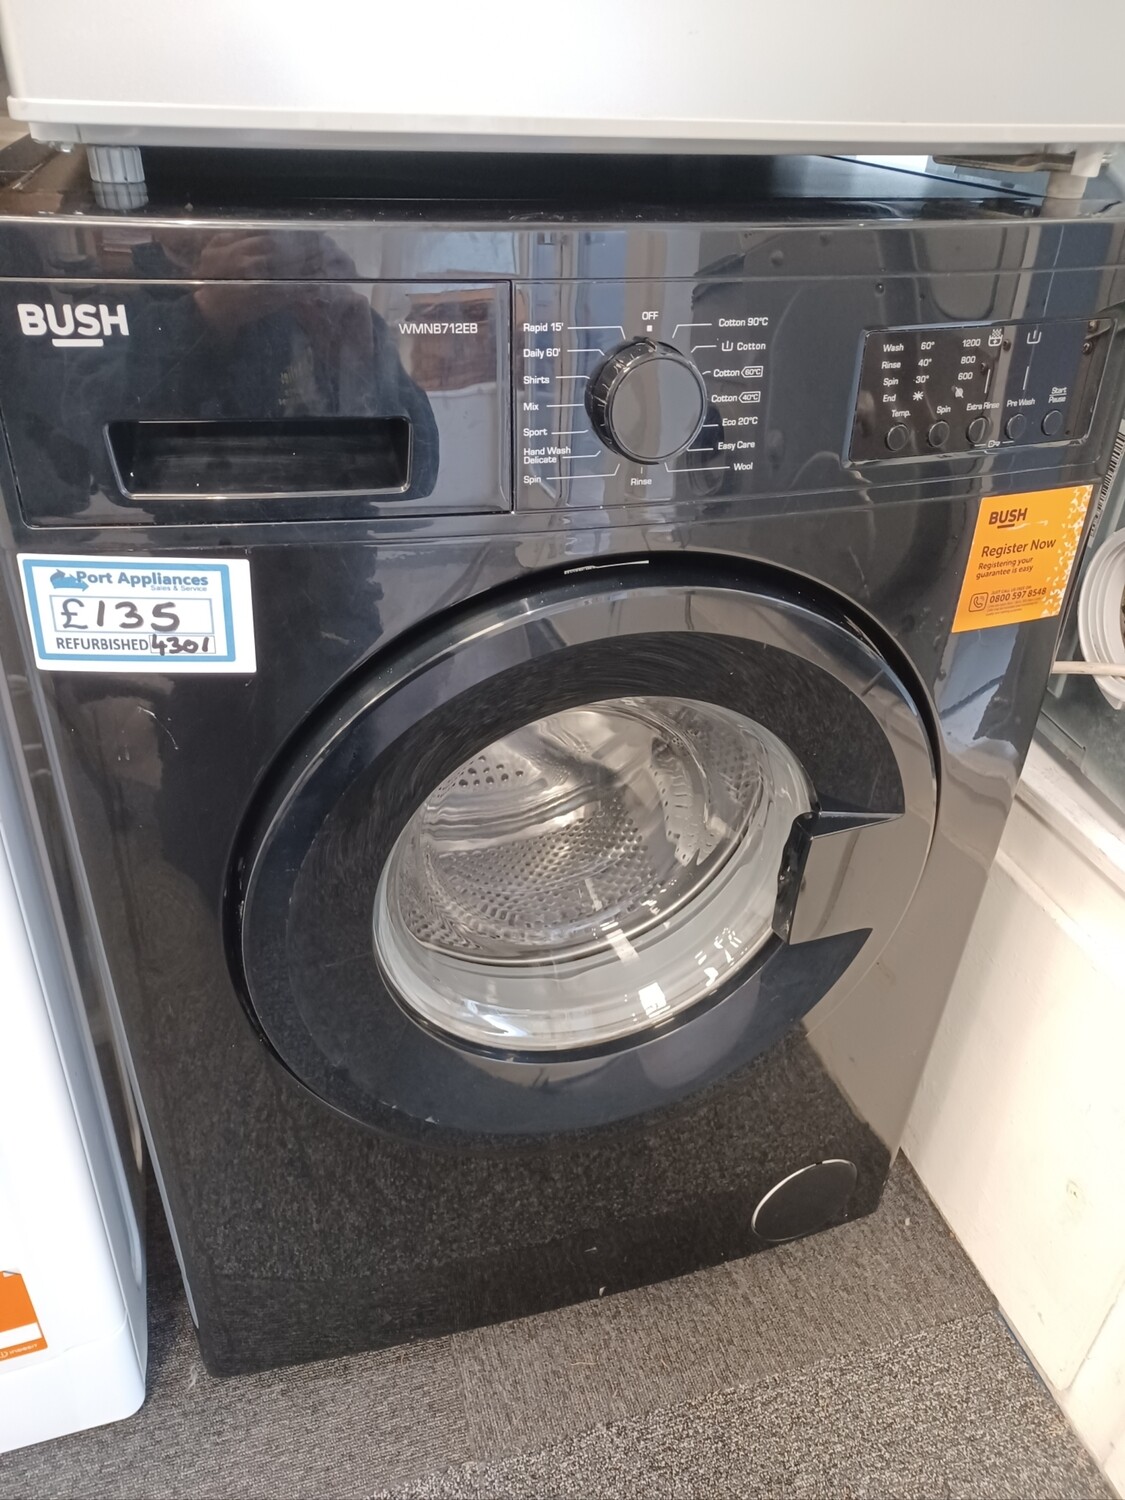 Bush 7kg Load, 1200 Spin Washing Machine - Black - Refurbished - 6 Month Guarantee. Located In our Whitby Road Shop